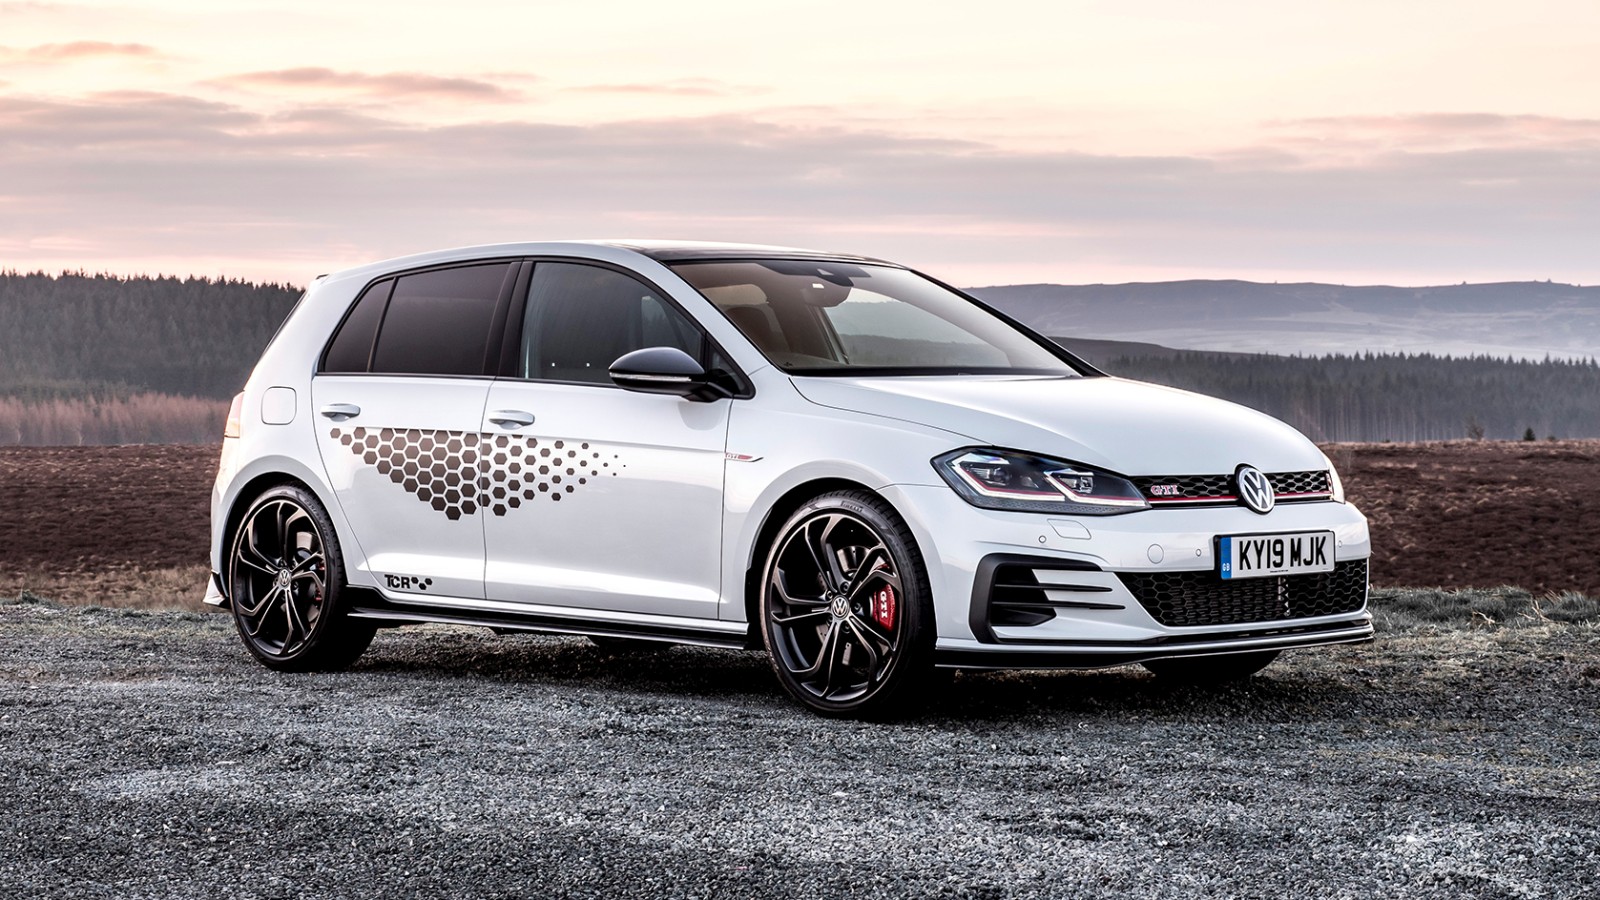 VW confirms limited edition Golf pricing in Africa